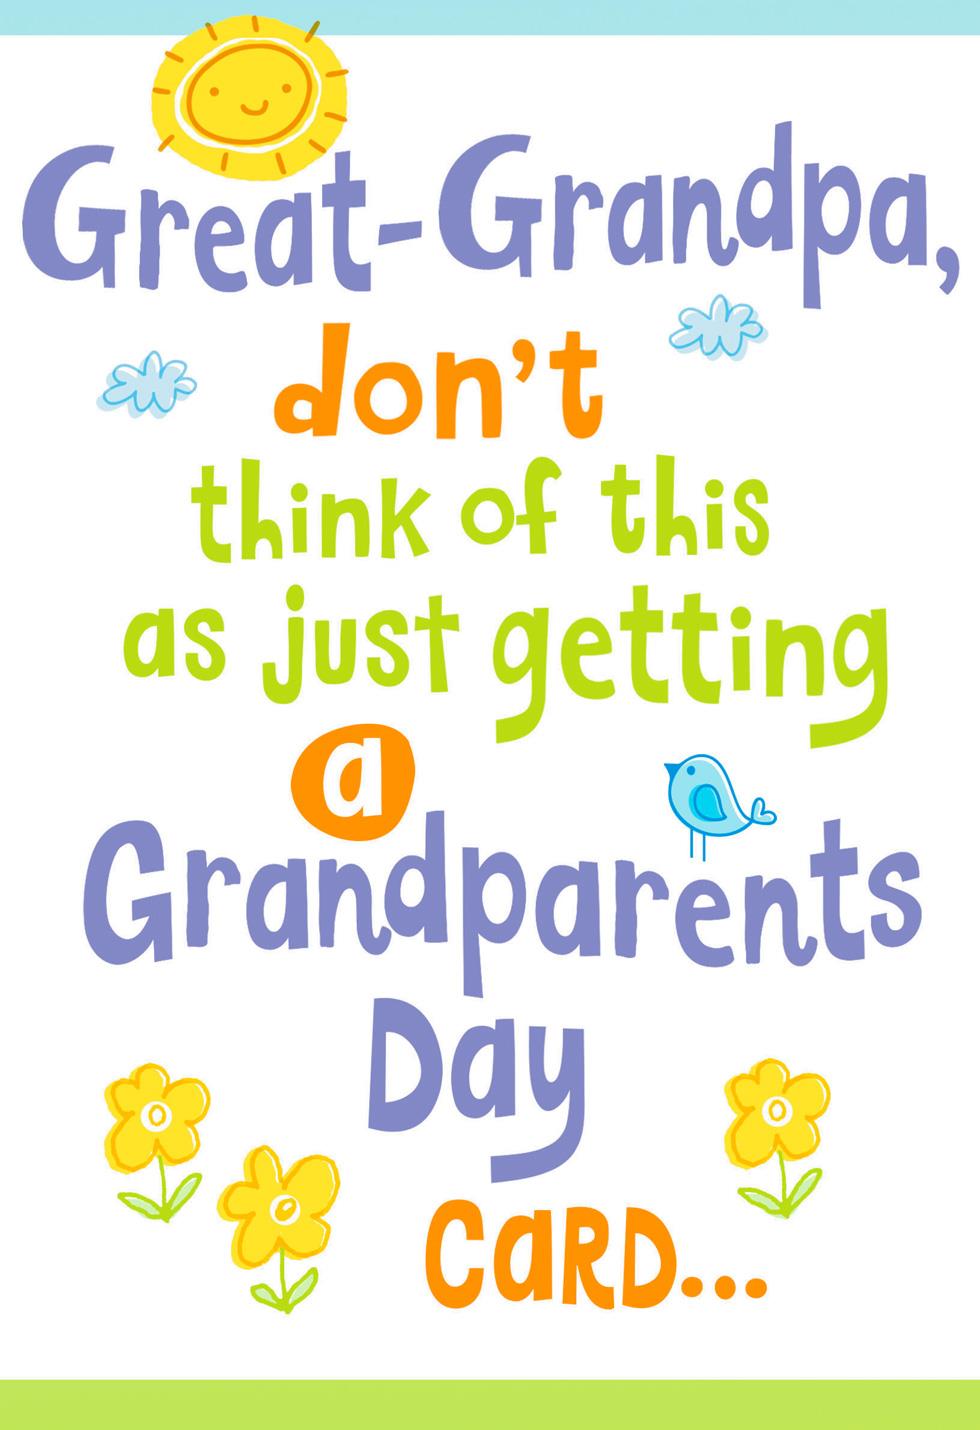 Download A Big Hug for You Grandparents Day Card for Great-Grandpa ...